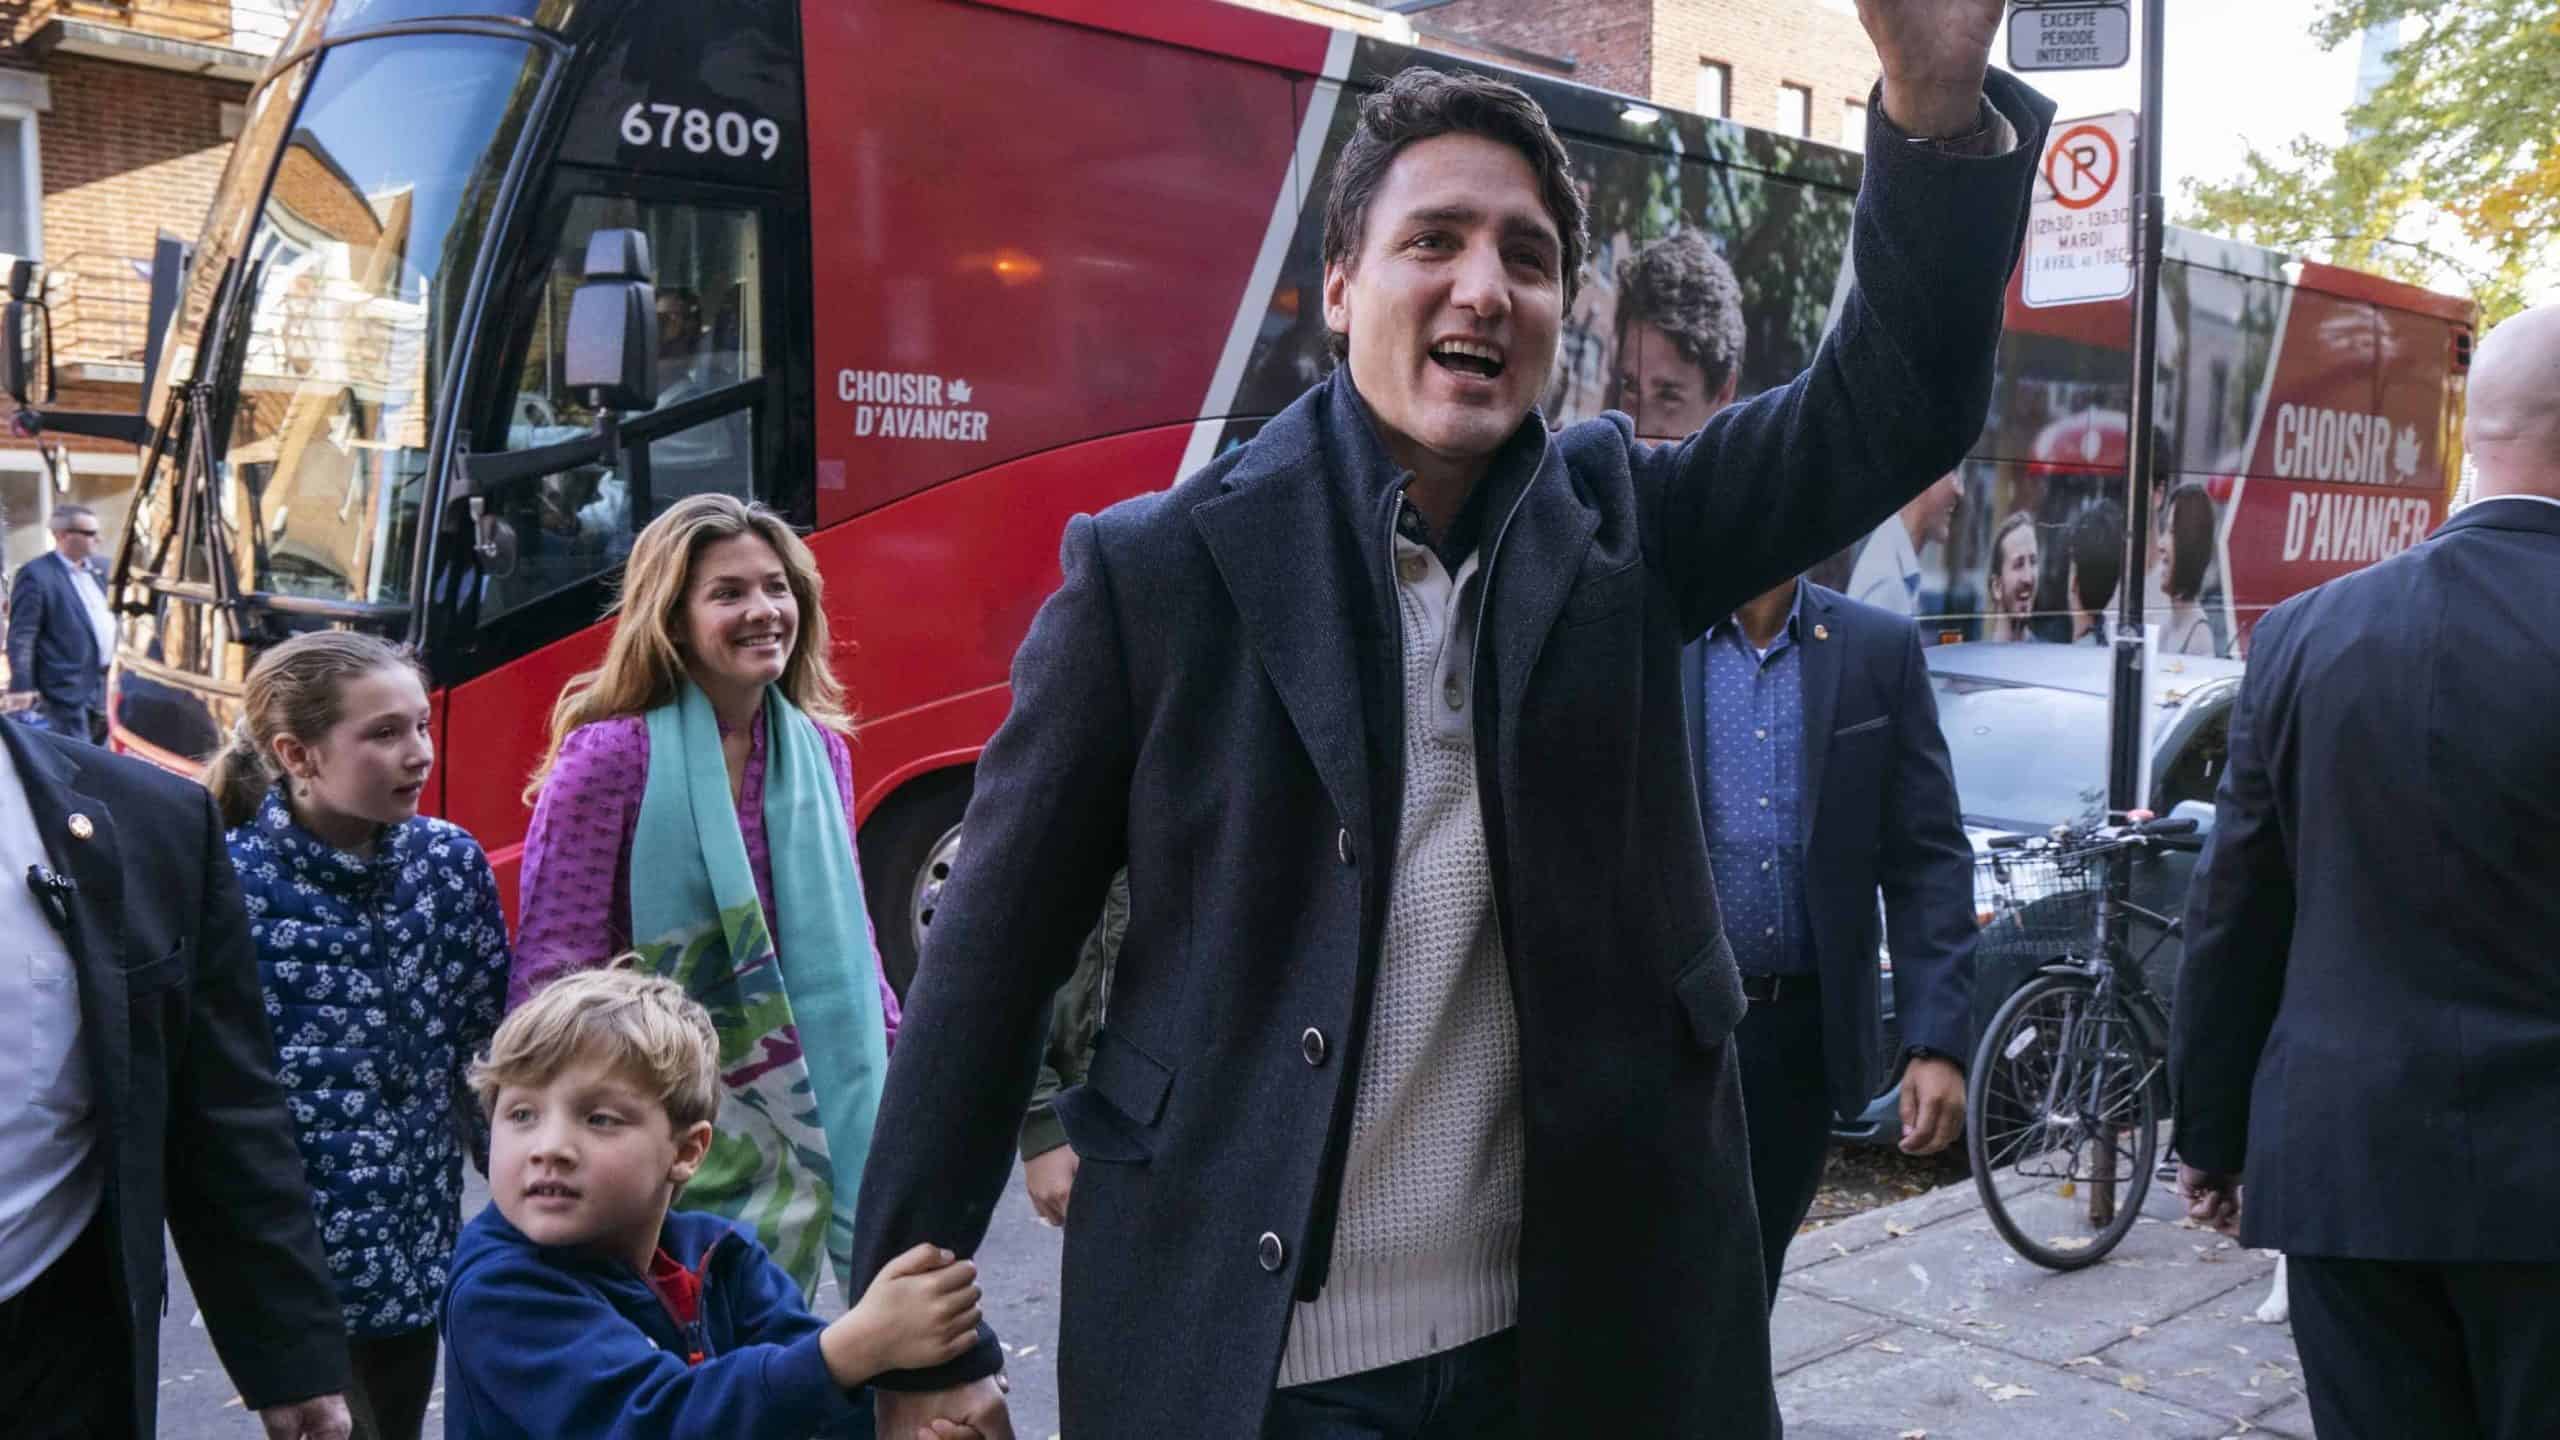 Trudeau wins second term as Canadian prime minister